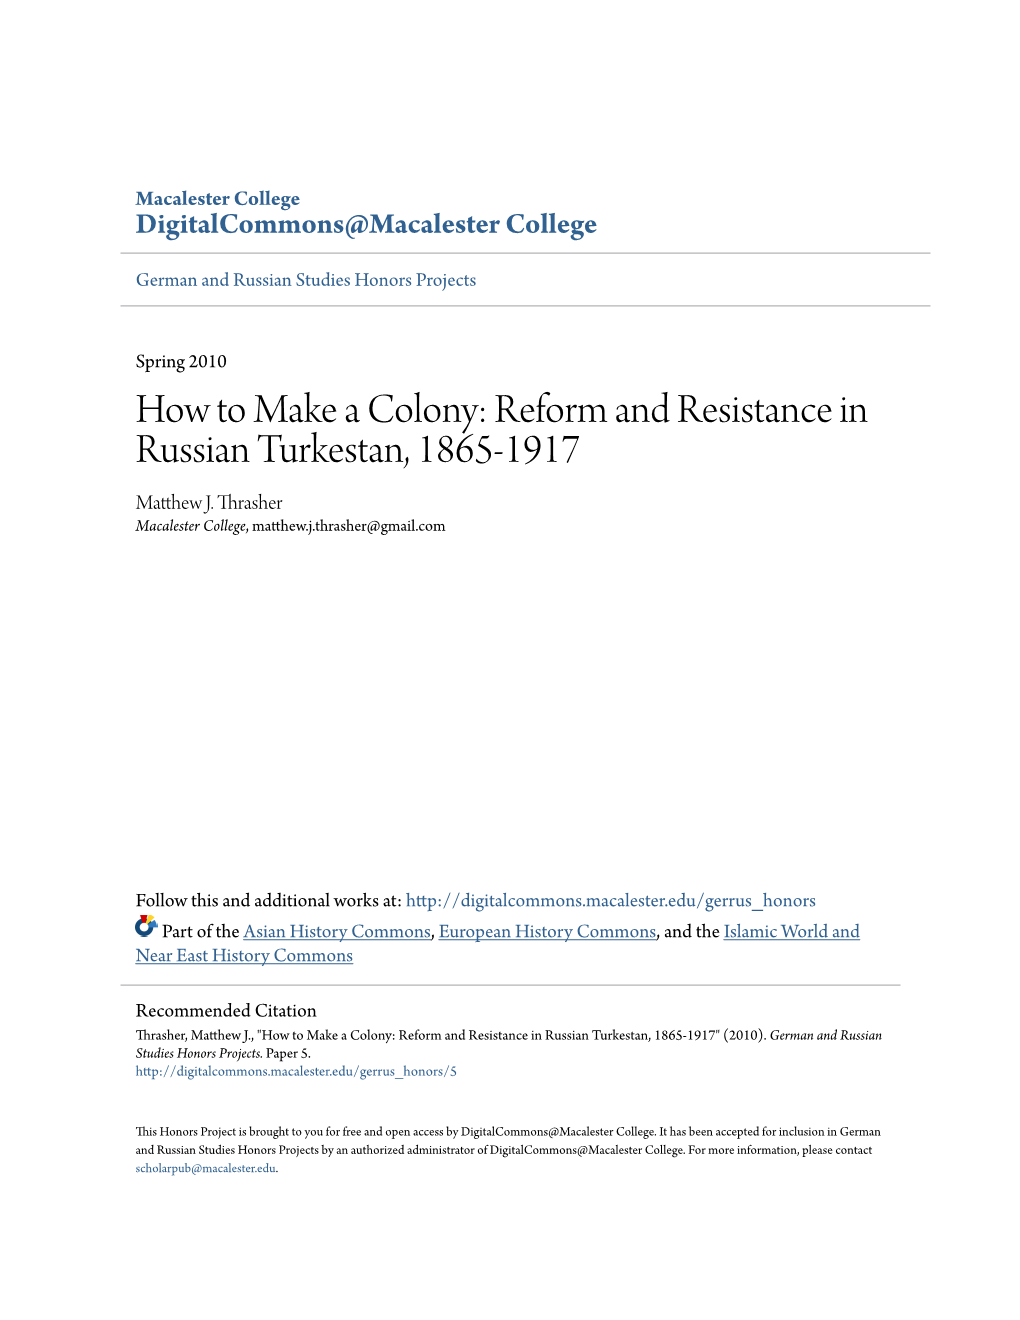 How to Make a Colony: Reform and Resistance in Russian Turkestan, 1865-1917 Matthew .J Thrasher Macalester College, Matthew.J.Thrasher@Gmail.Com